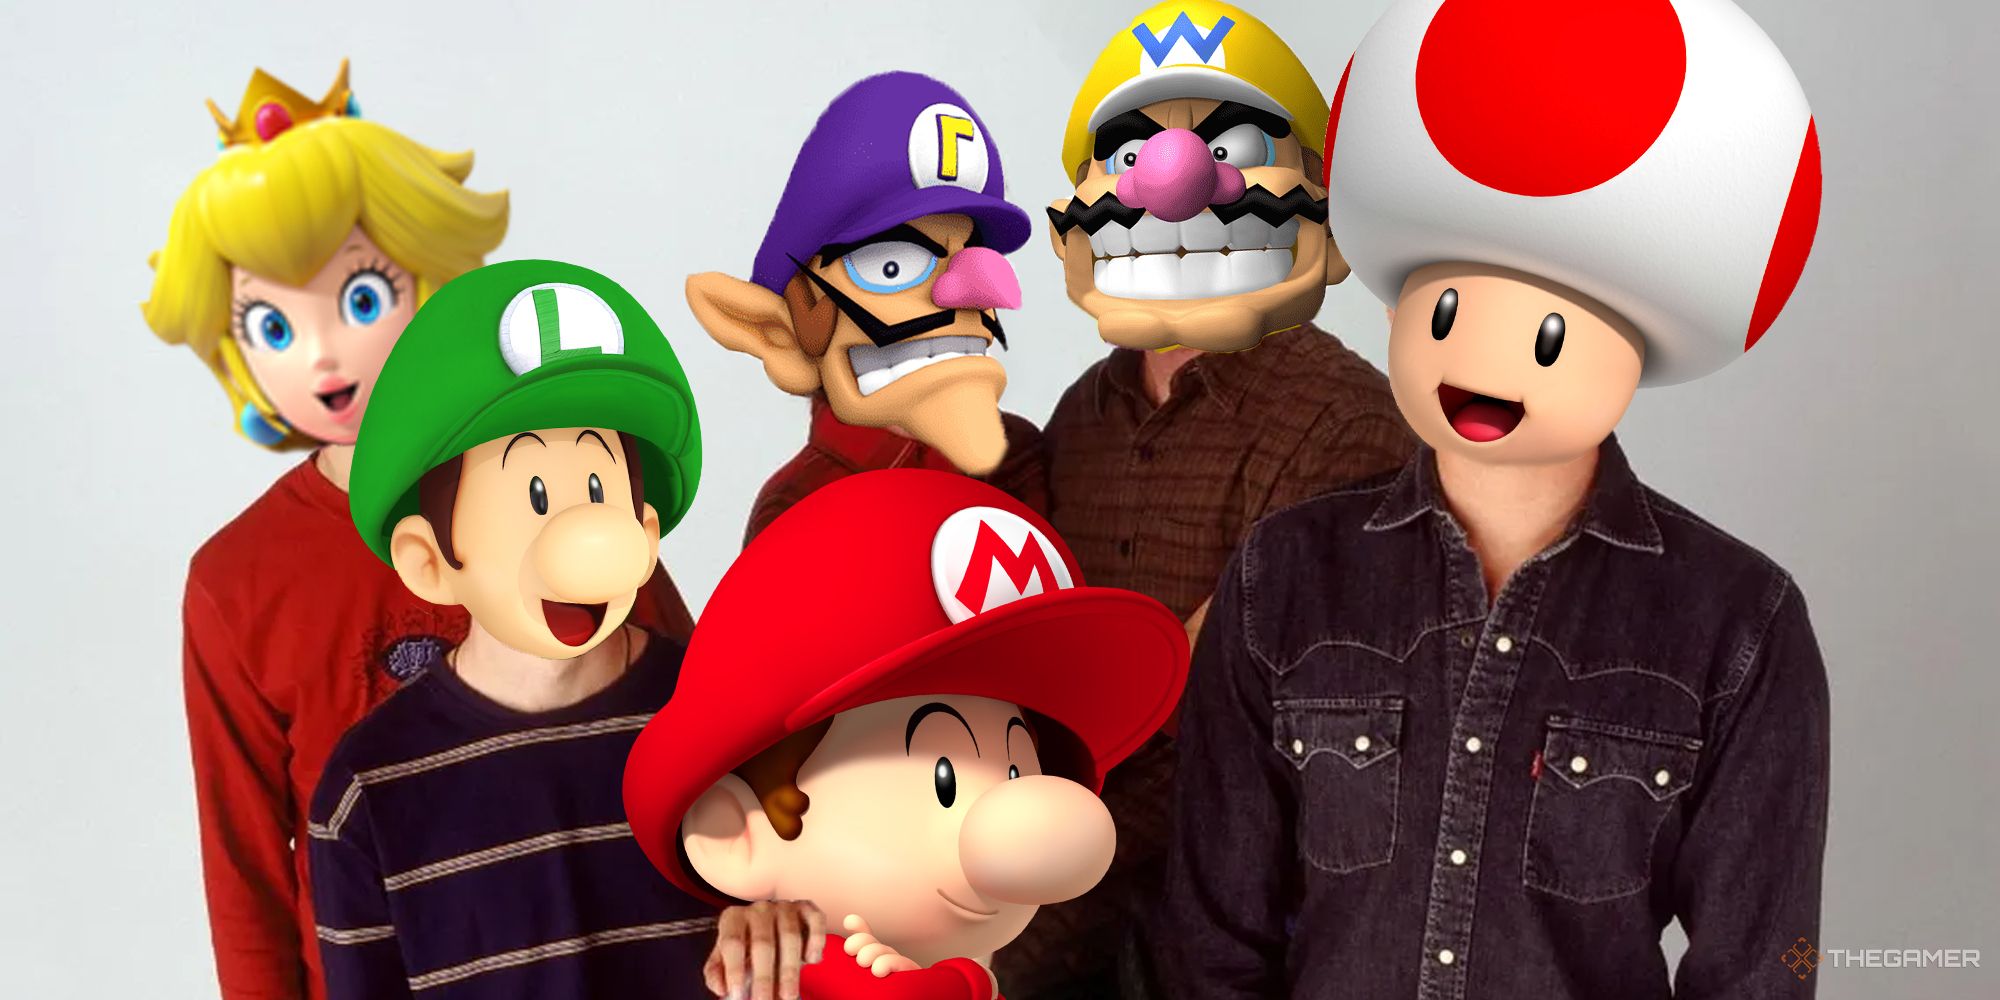 Princess Peach, Baby Luigi, Waluigi, Baby Mario, Wario, and Toad stand together in a sitcom-style family portrait.